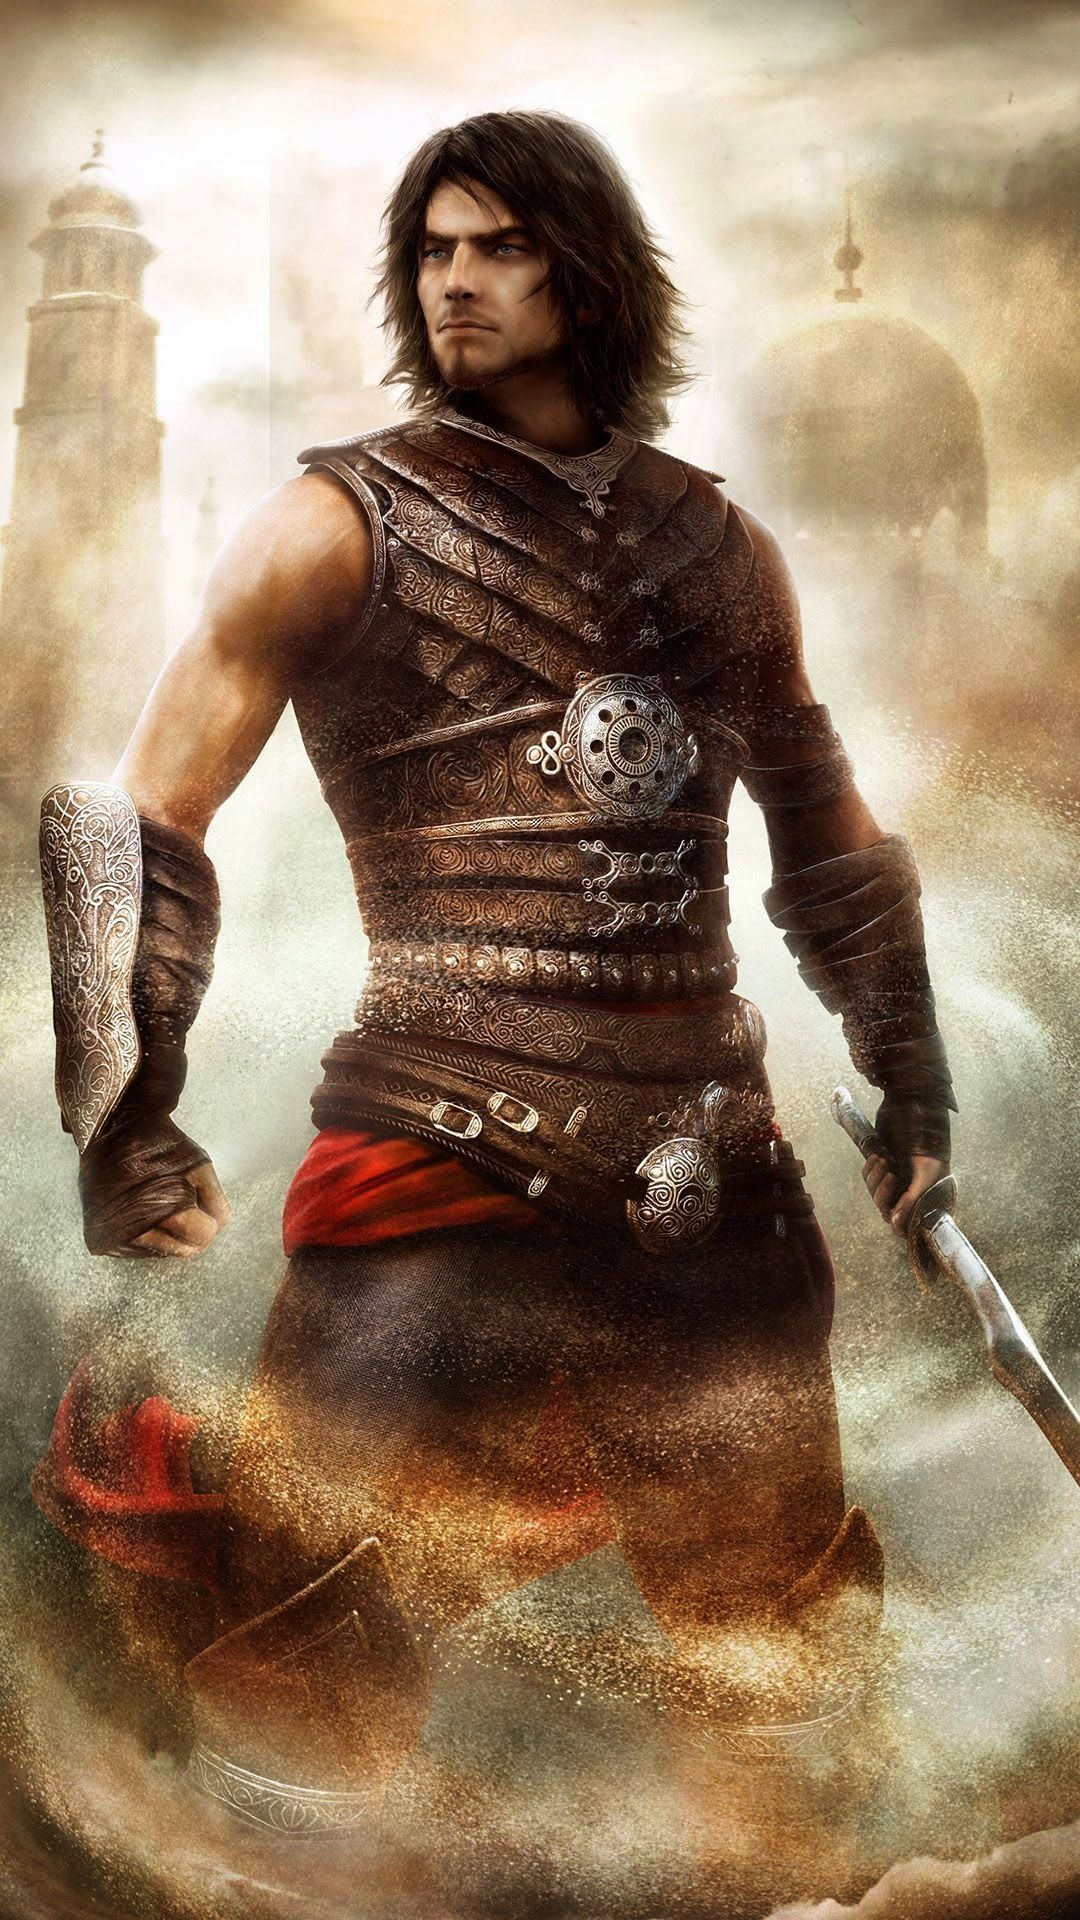 HD iPhone Wallpaper For Prince Of Persia